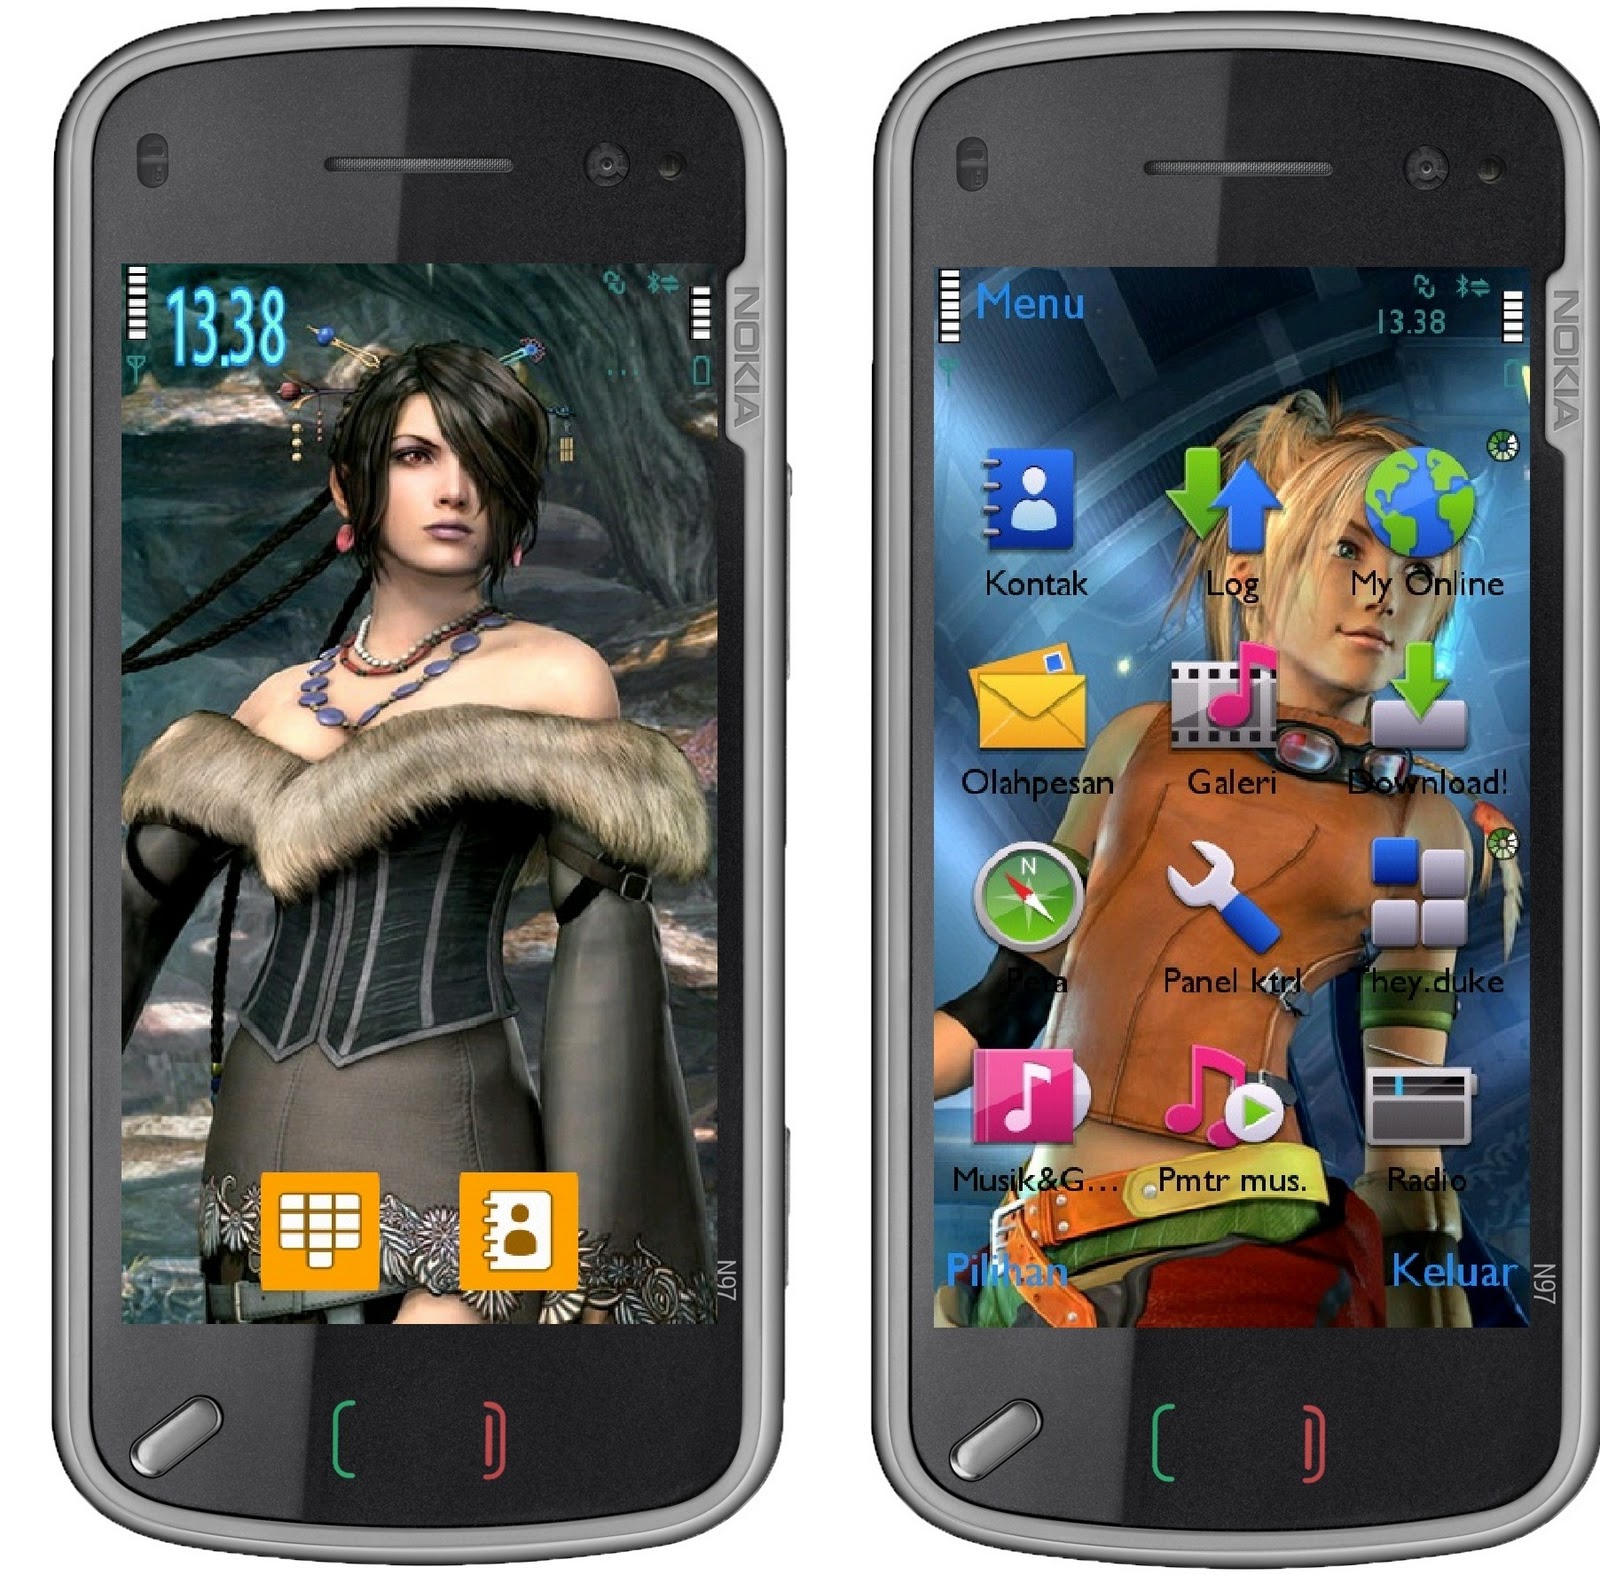 Download Line Software For Nokia 5800